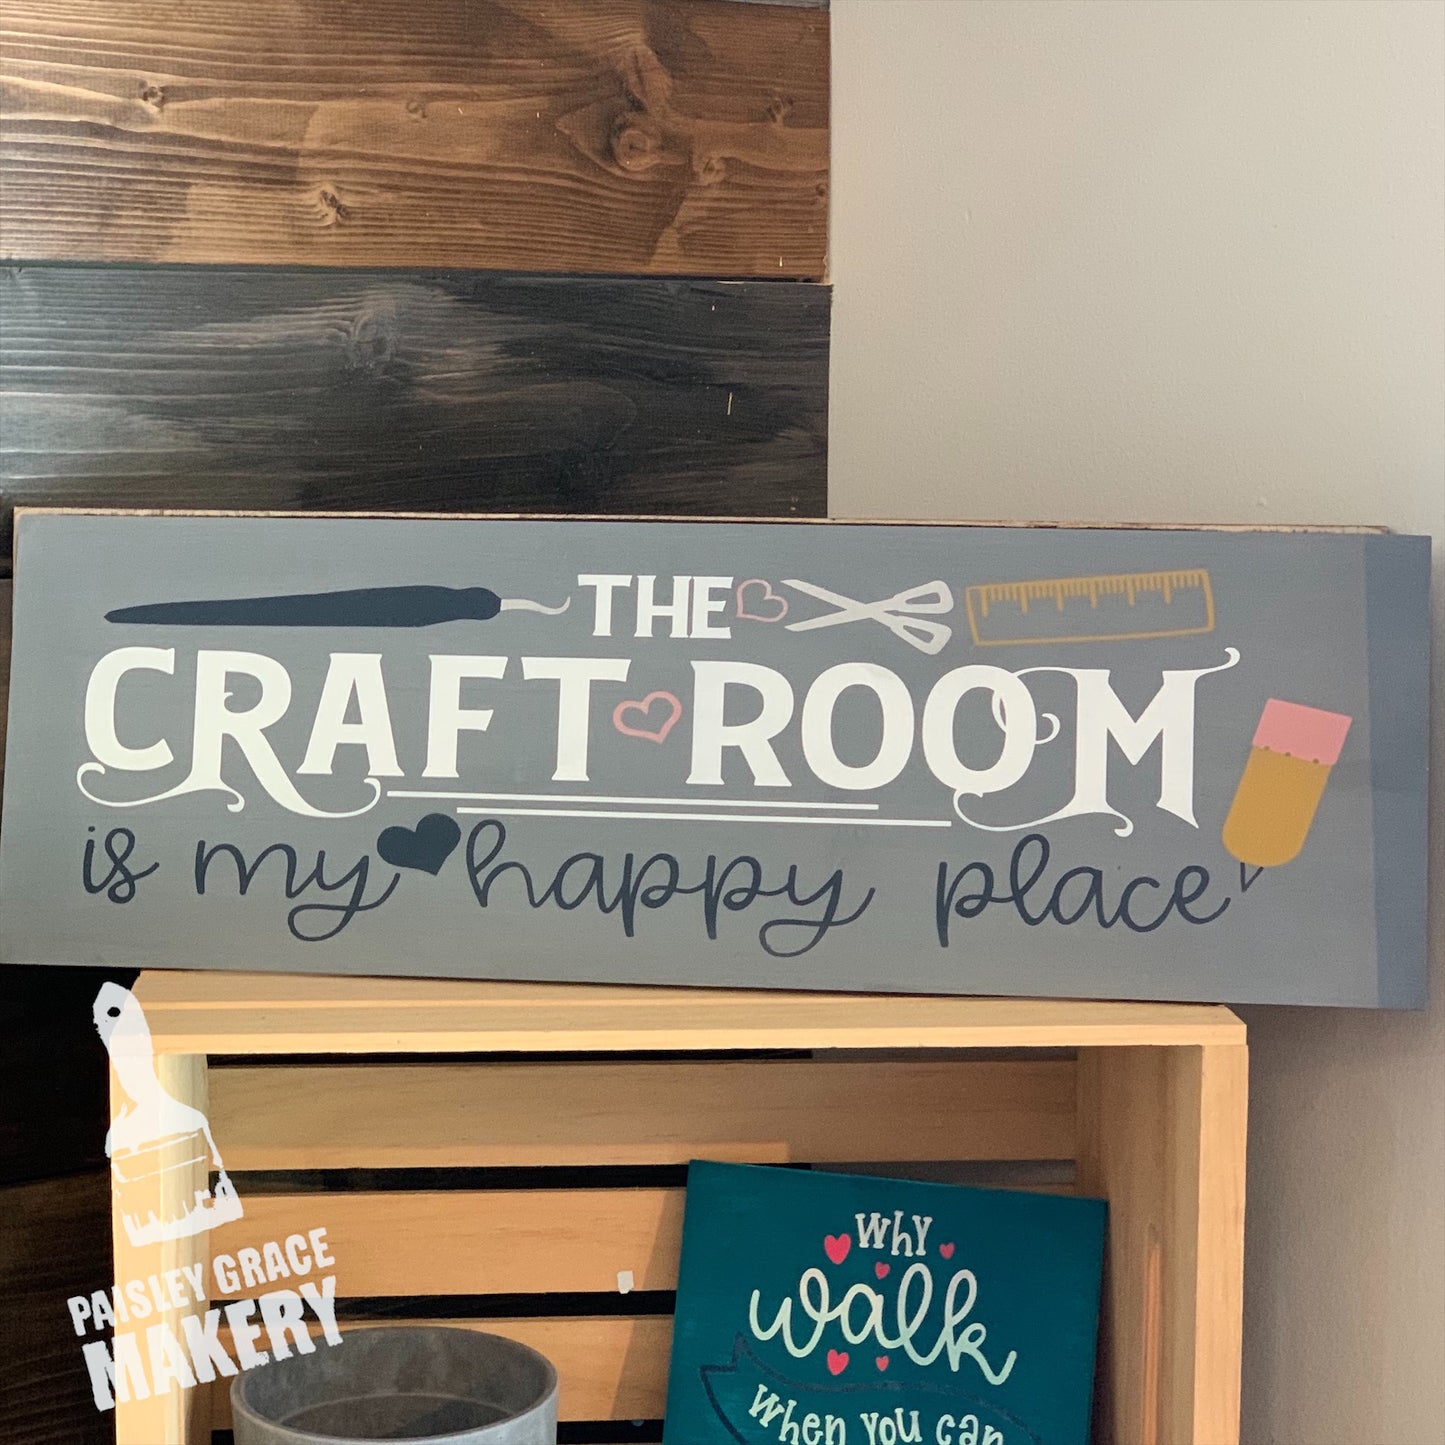 The craft room is my happy place_plank: PLANK DESIGN - Paisley Grace Makery